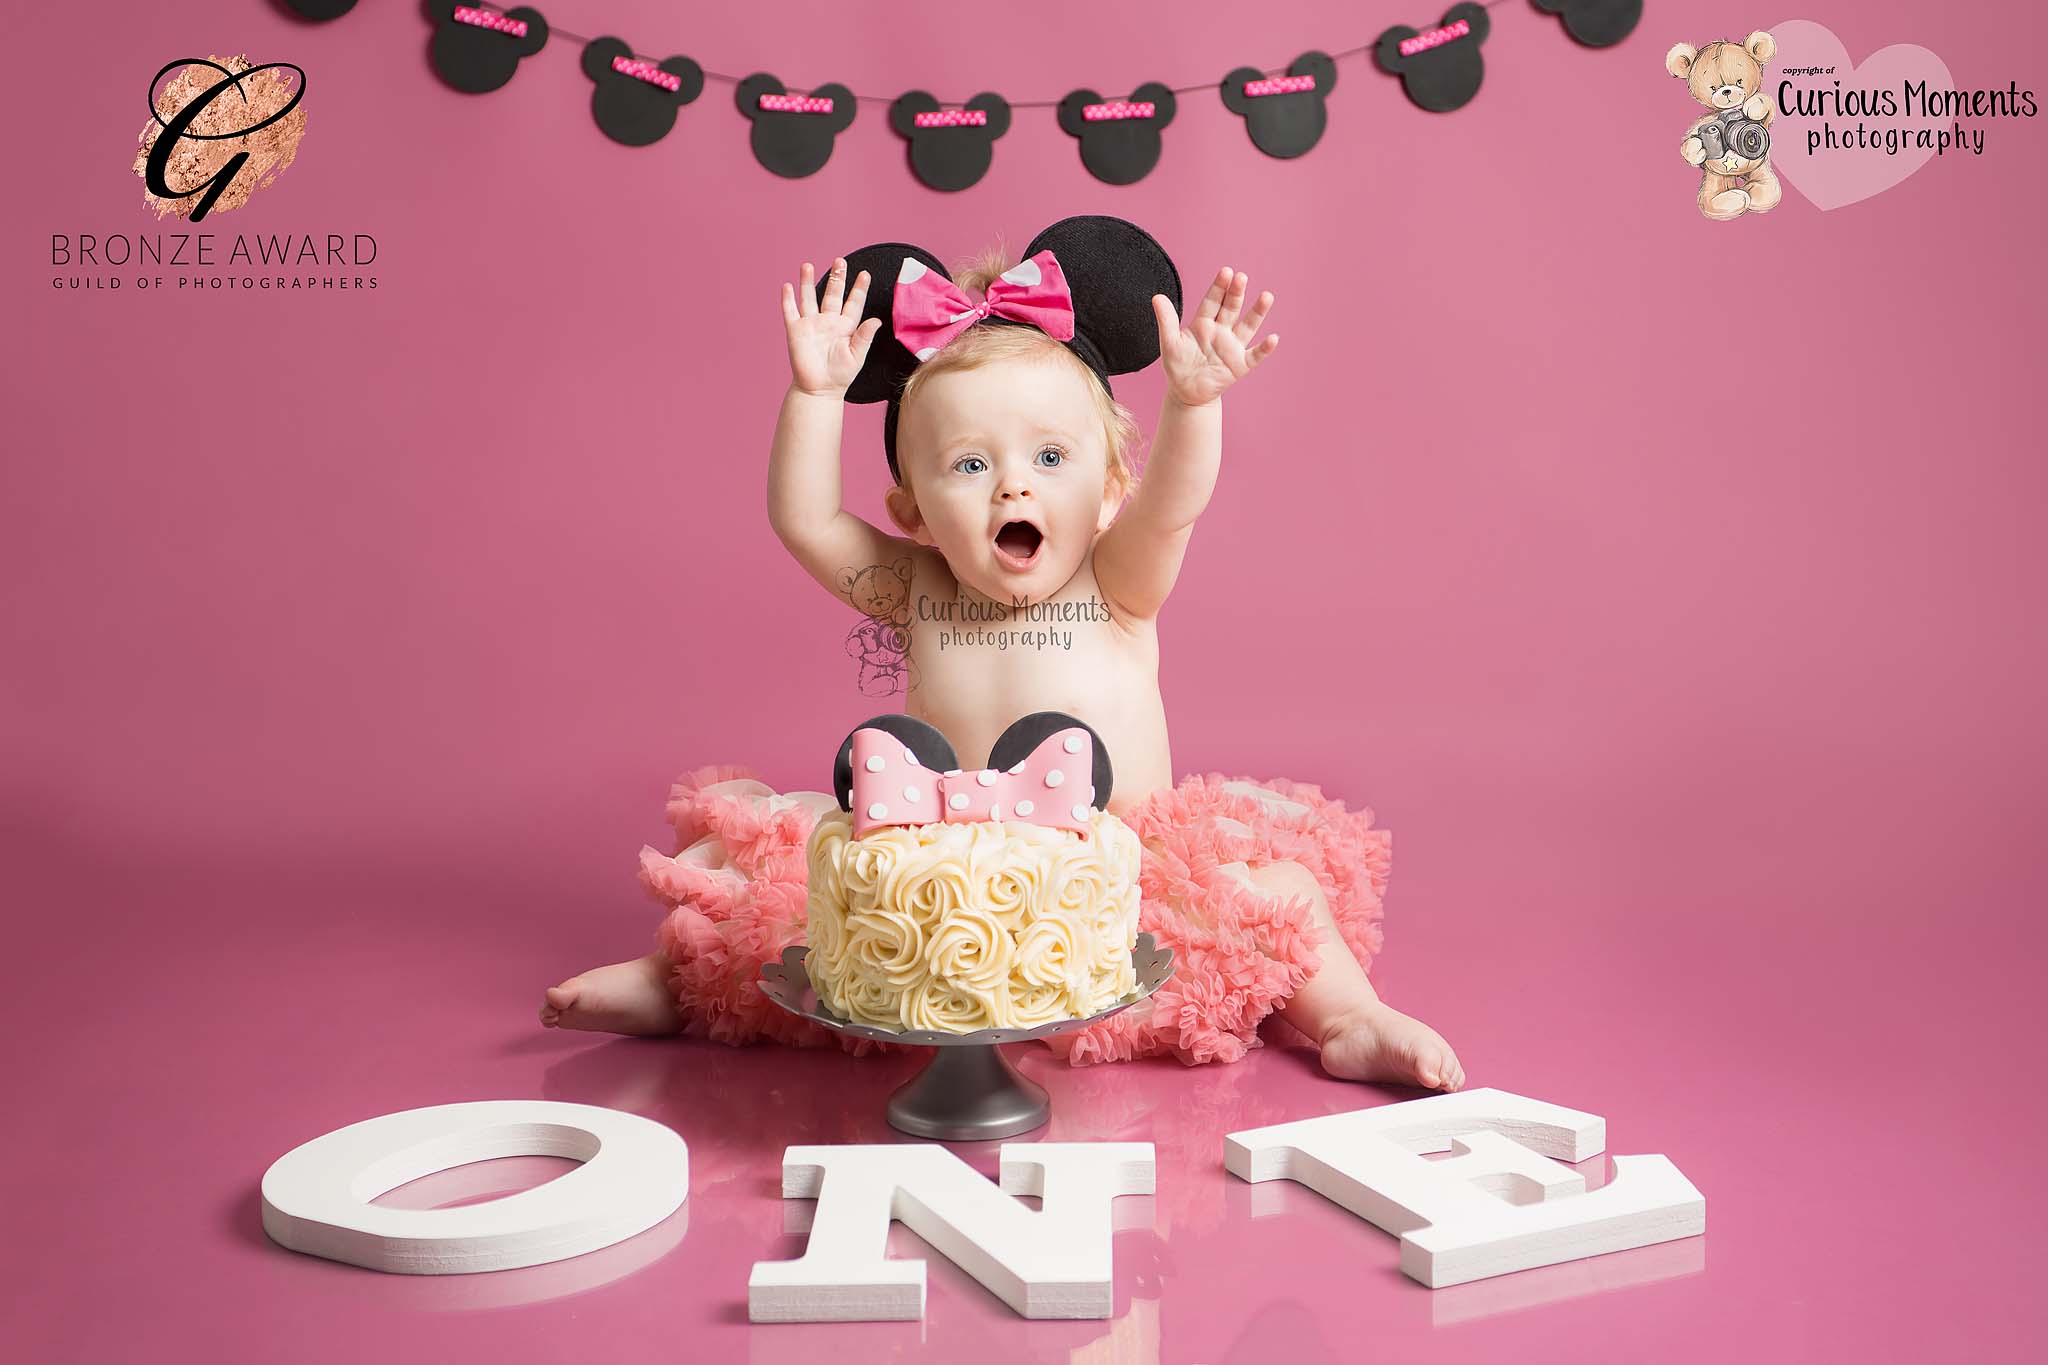 Award winning image of baby girls minnie mouse cake smash with baby hoding hands high in air with enjoyment